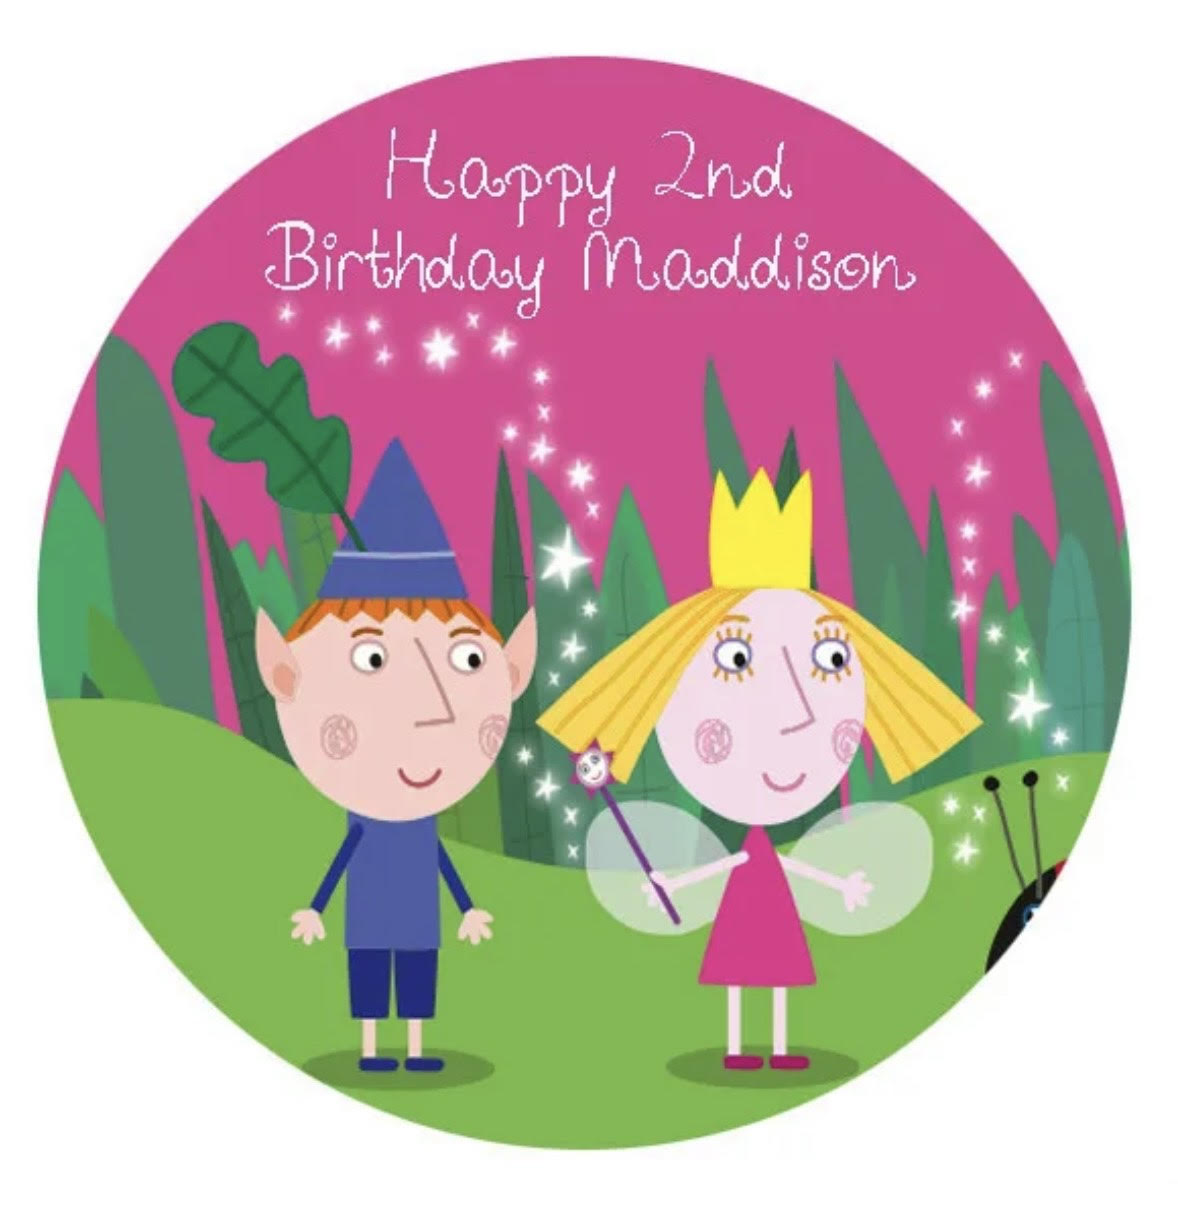 Ben & Holly's Little Kingdom Round Cake Edible Icing Image Topper 19cm